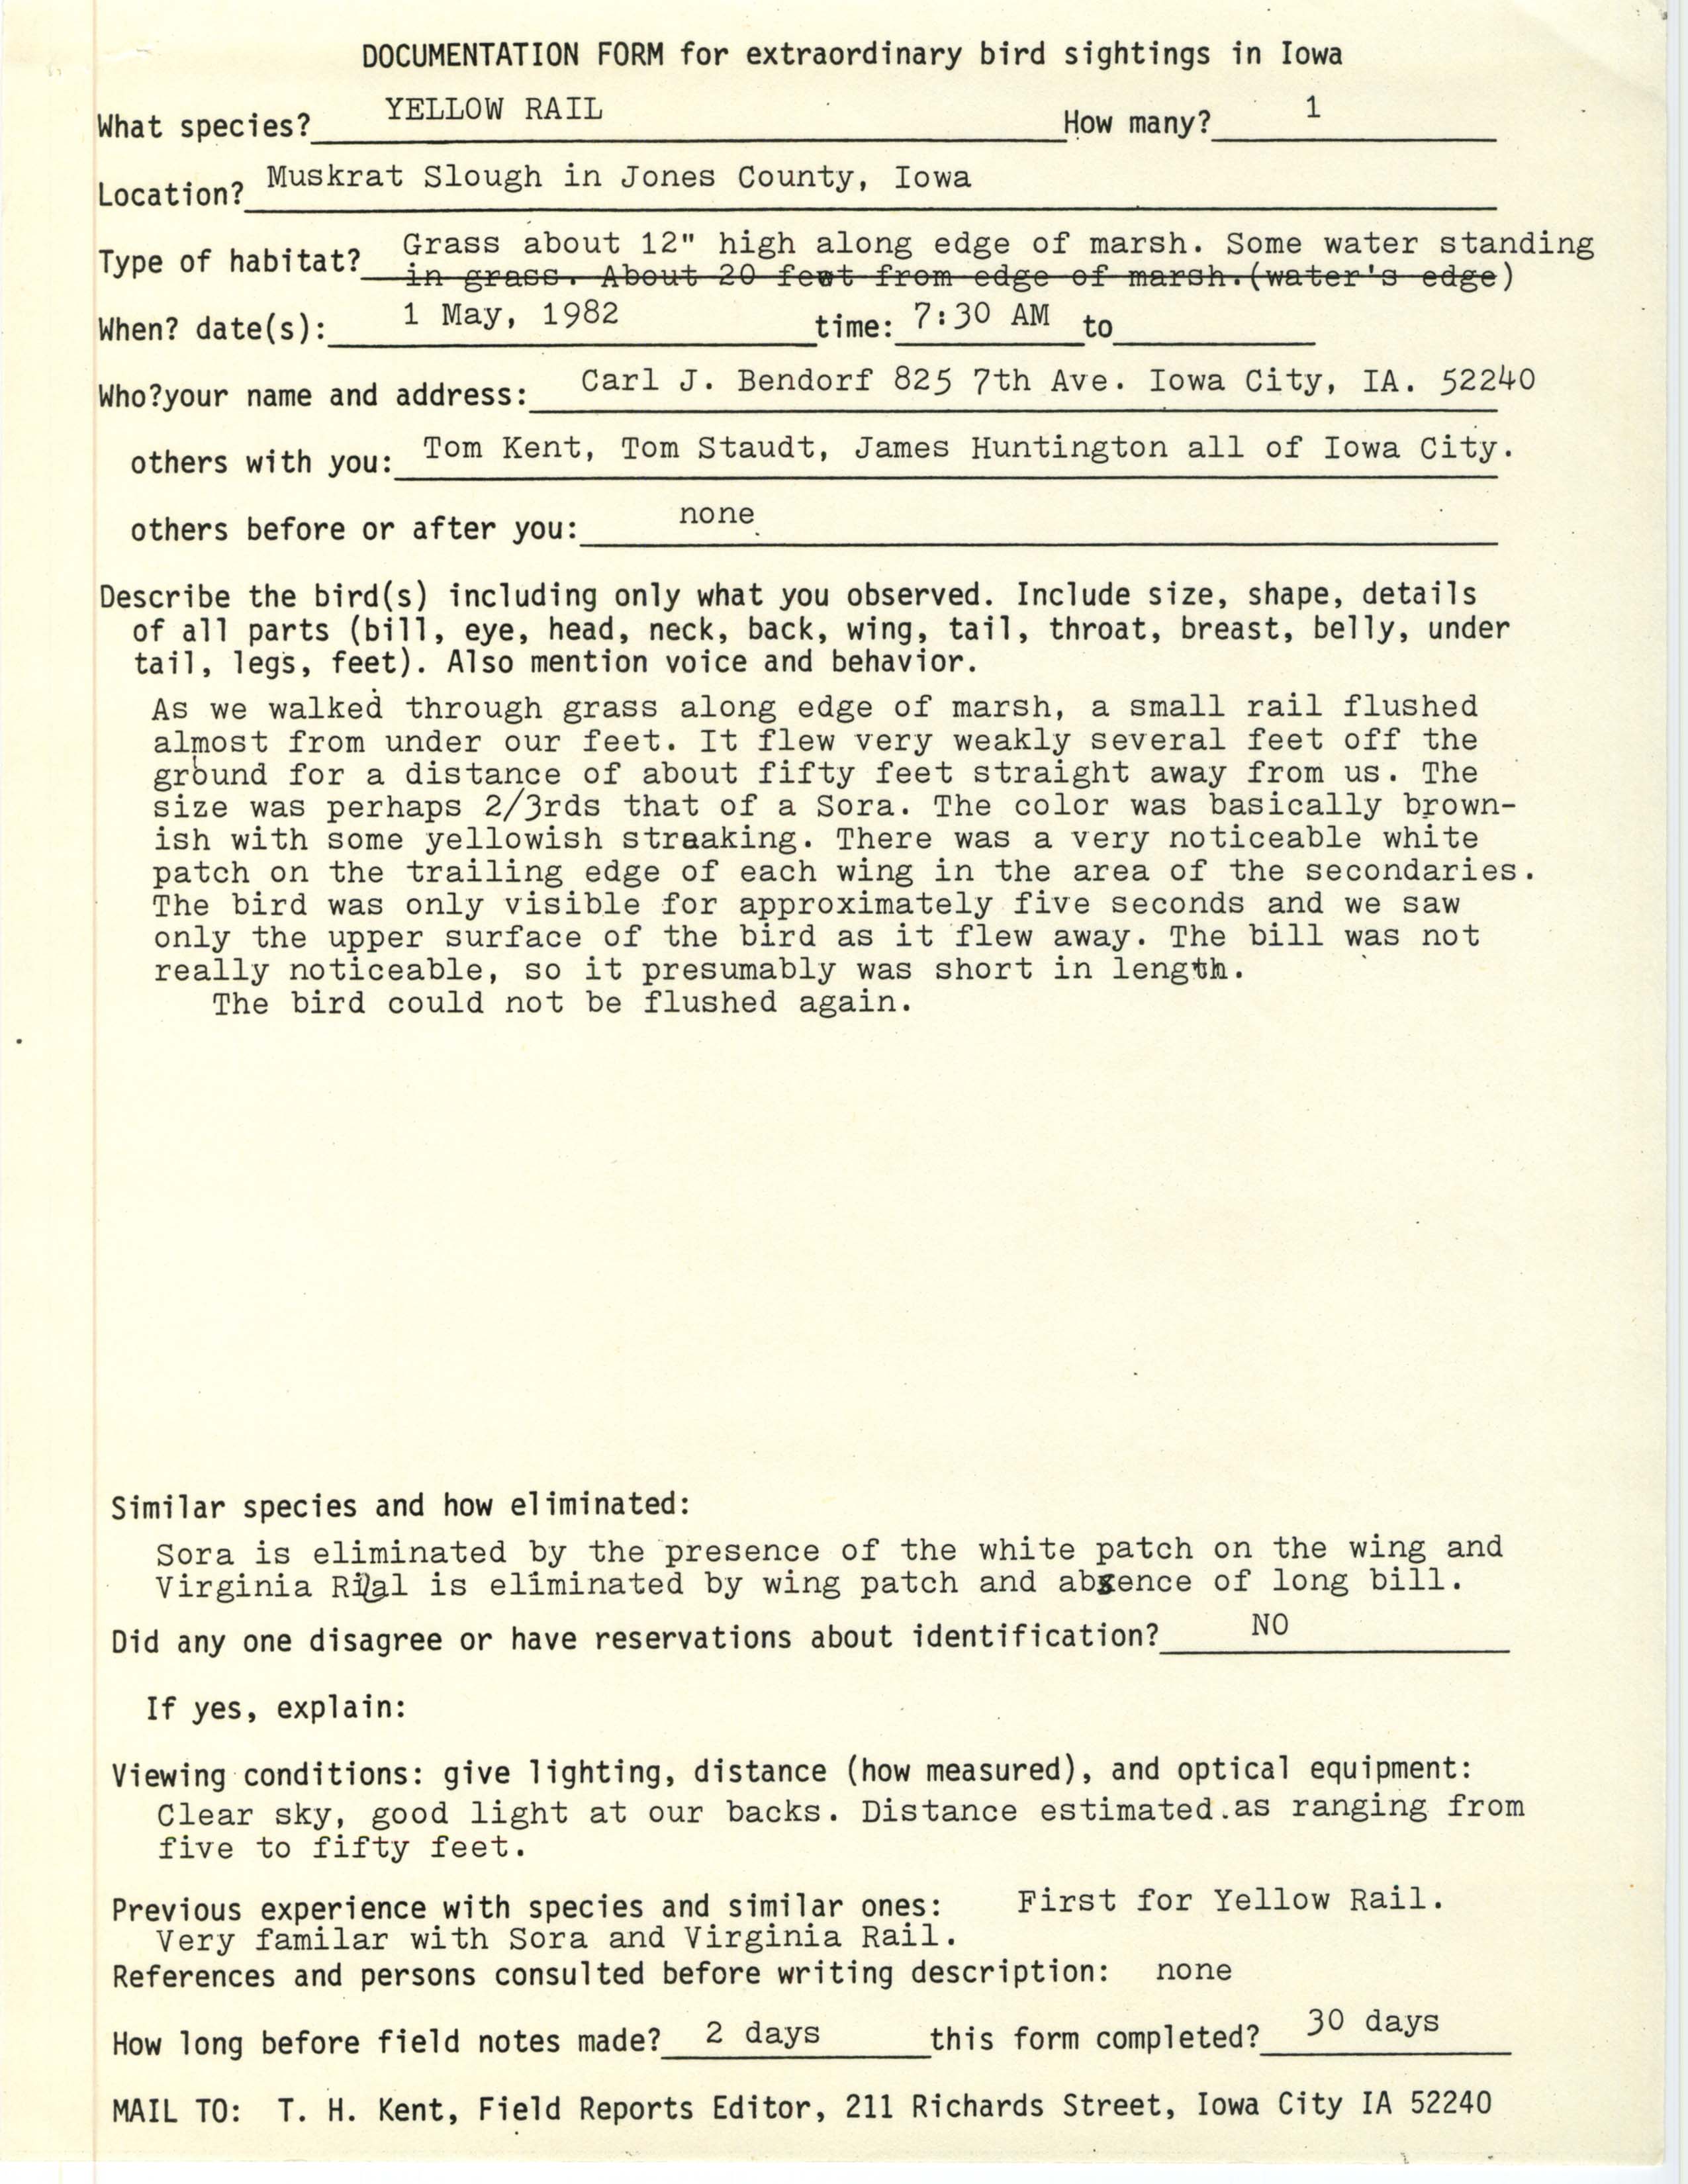 Rare bird documentation form for Yellow Rail at Muskrat Slough in 1982